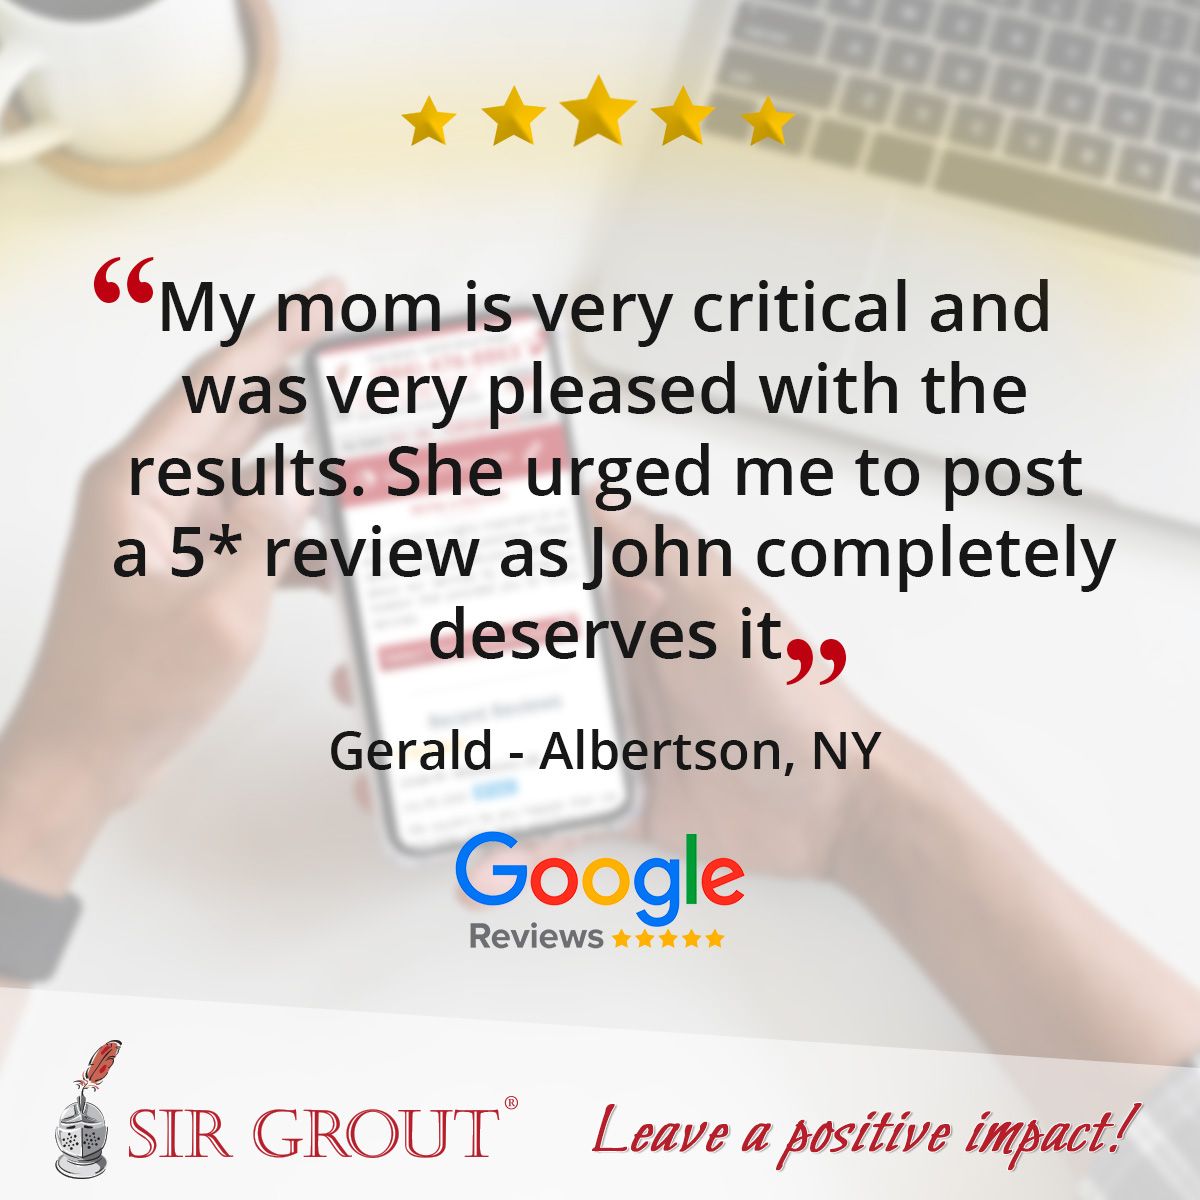 My mom is very critical and was very pleased with the results. She urged me to post a 5* review as John completely deserves it